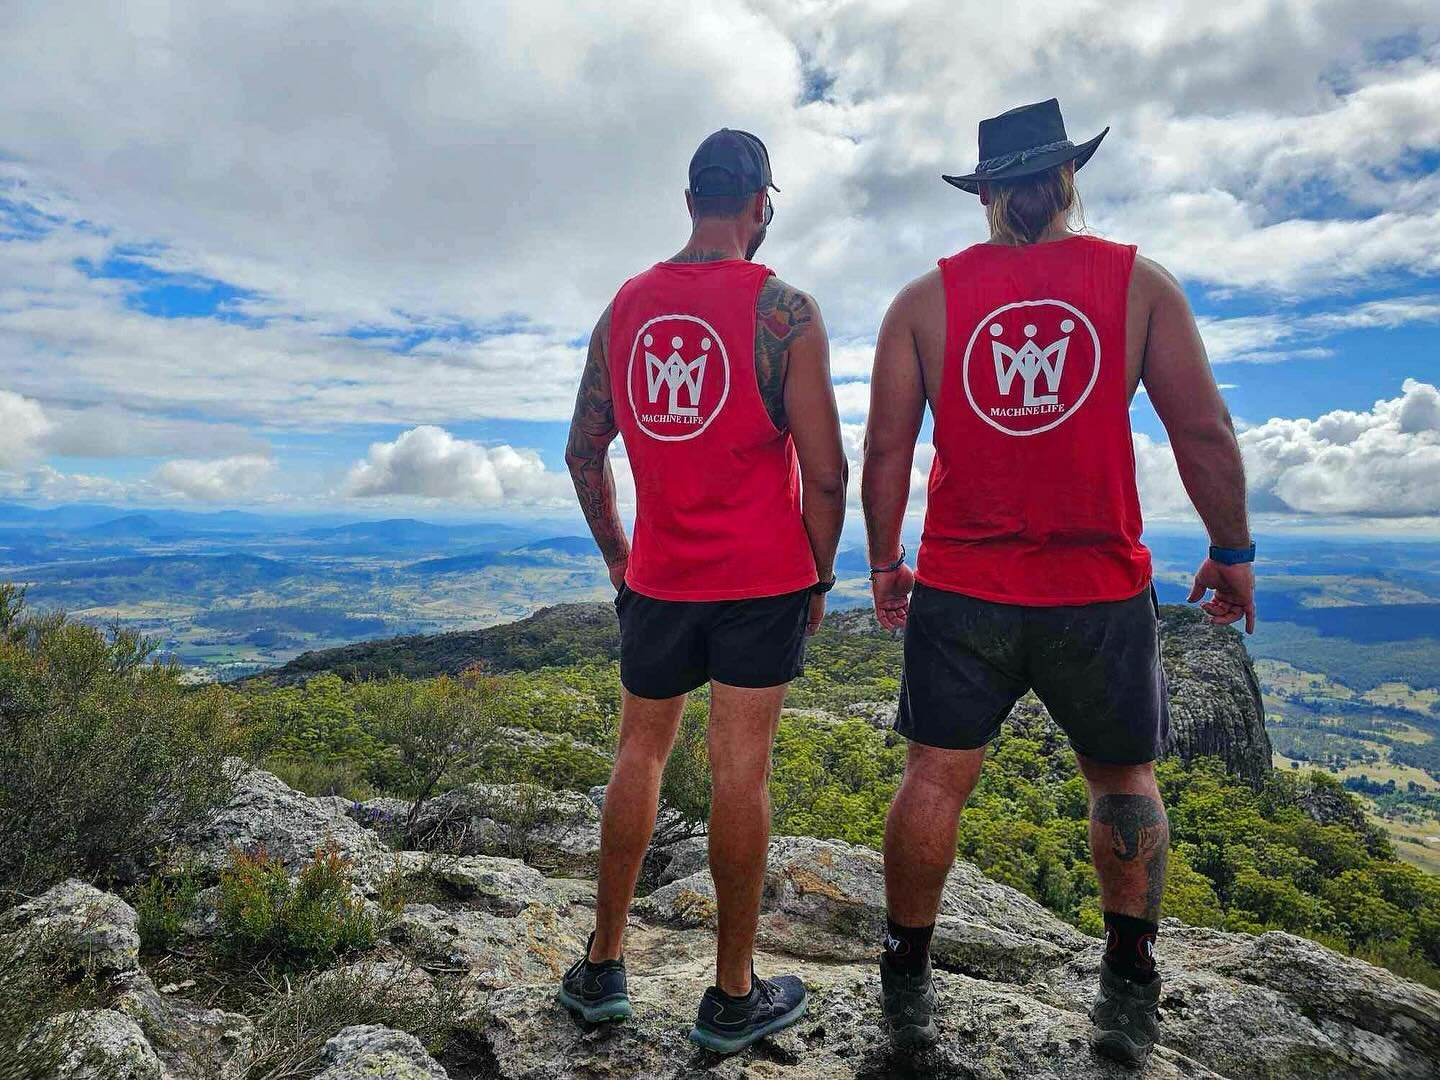 LIVIN THE MACHINE LIFE! 💯⛰️

Chasing natural highs and loving life at the top.💪🏽

Surround yourself with people who push you to become better.🔥

#jointhesquad #brotherhood #passion #livelifetothefull #heathier #stronger #fitnessmotivation #outdoo